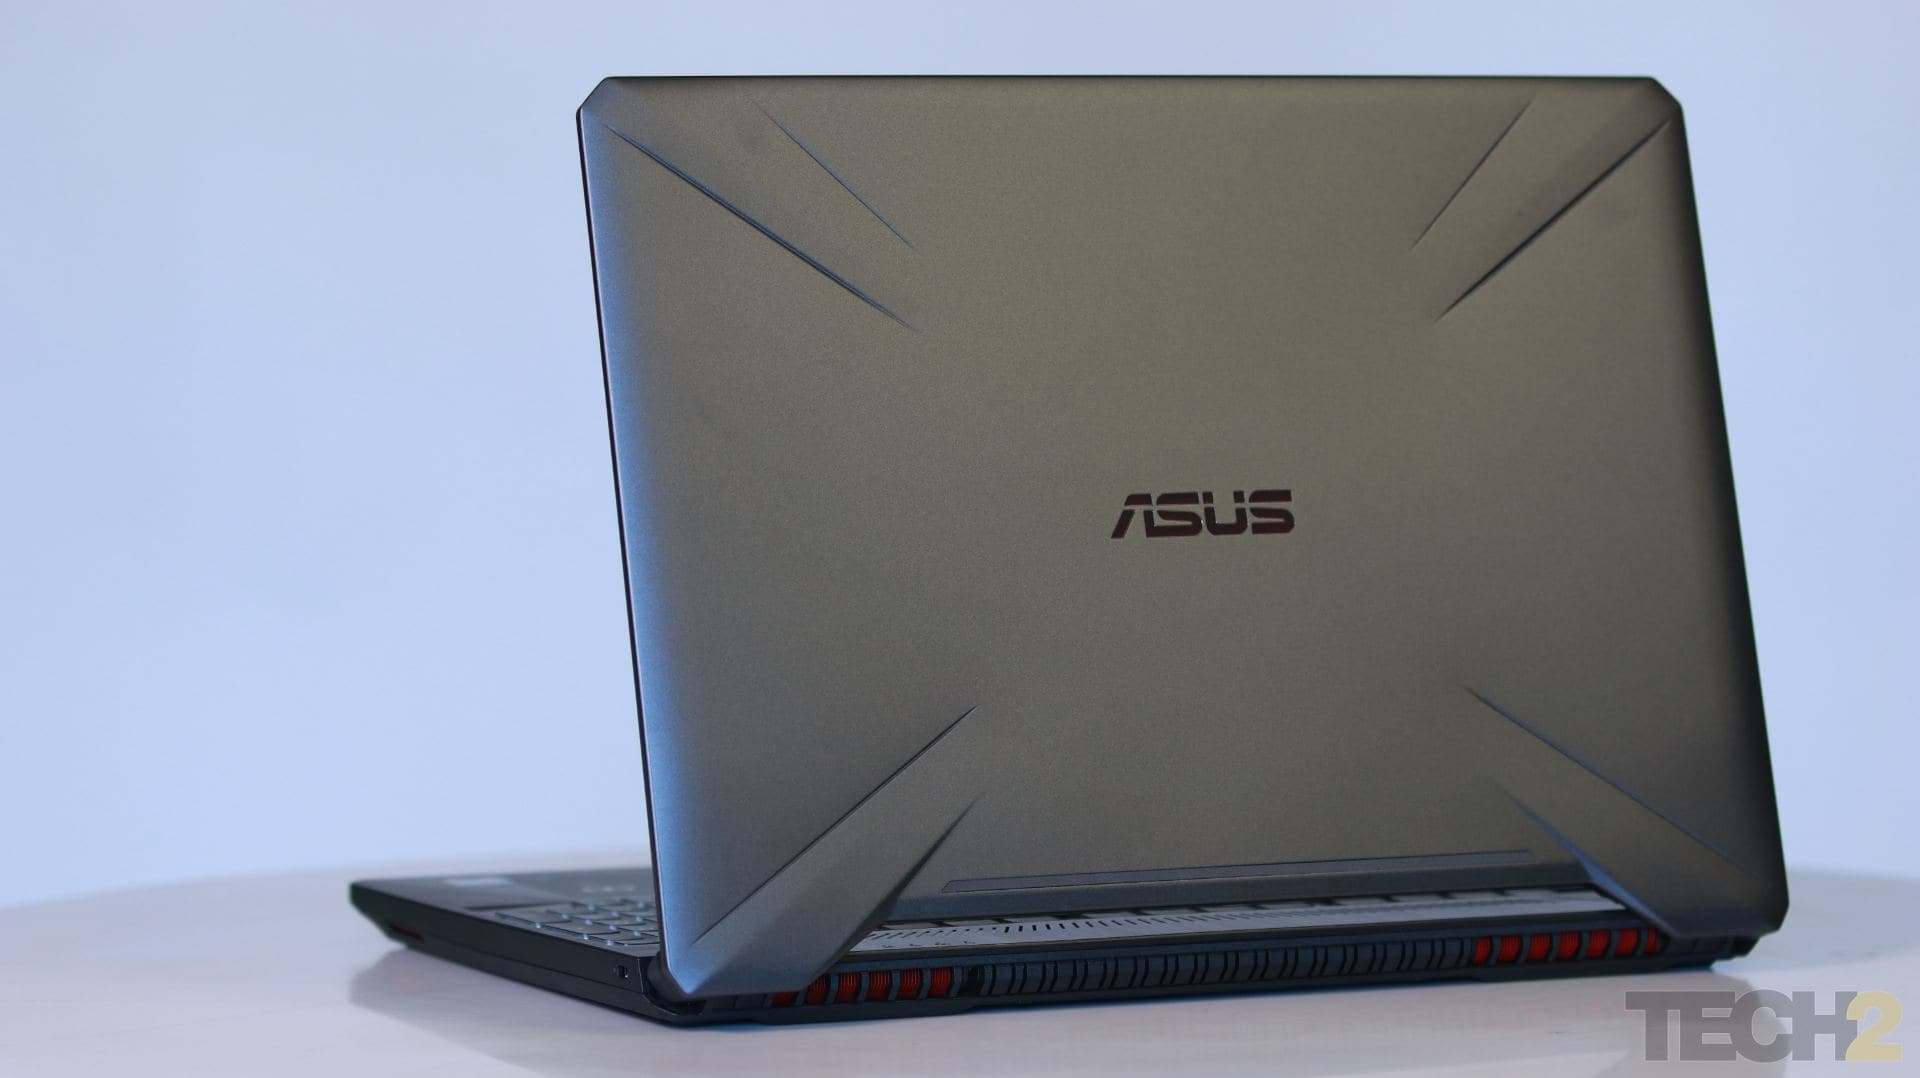  ASUS TUF Gaming FX505DT Review: An affordable gaming laptop with decent hardware